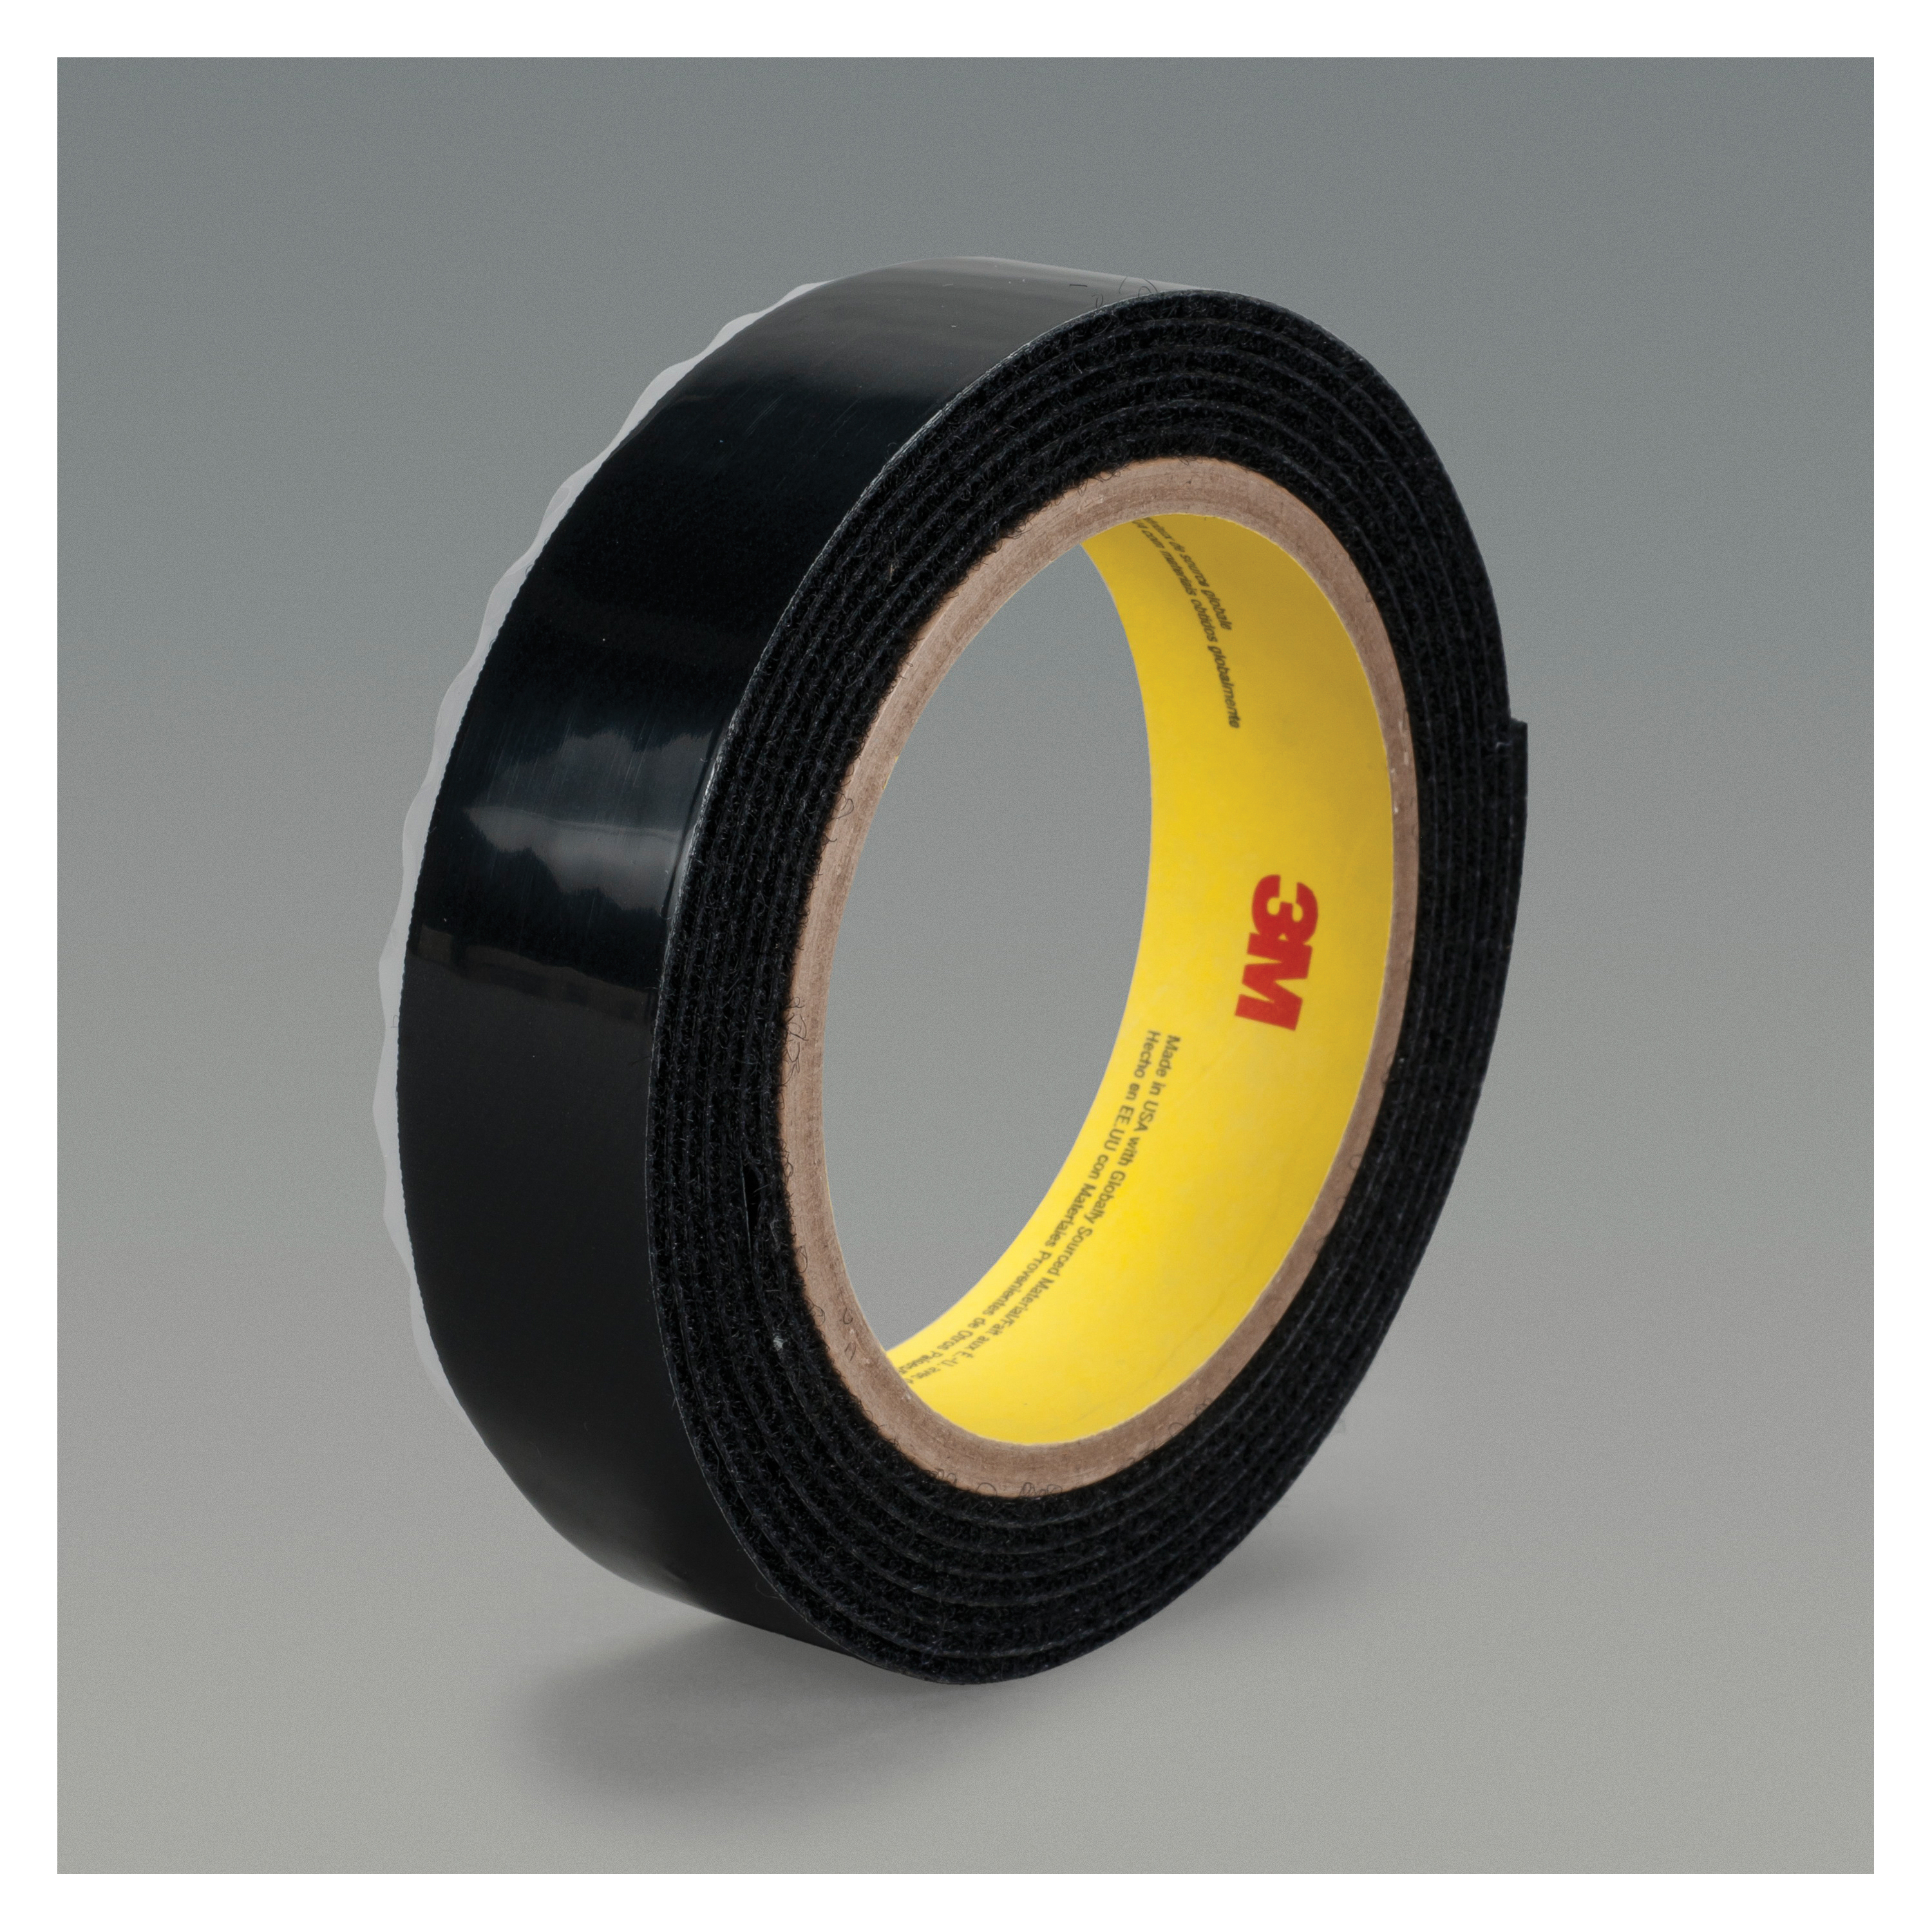 3M™ 021200-87372 Reclosable Loop Fastener Tape, 50 yd L x 2 in W, 0.15 in THK Engaged, Acrylic Adhesive, Woven Nylon Backing, Black